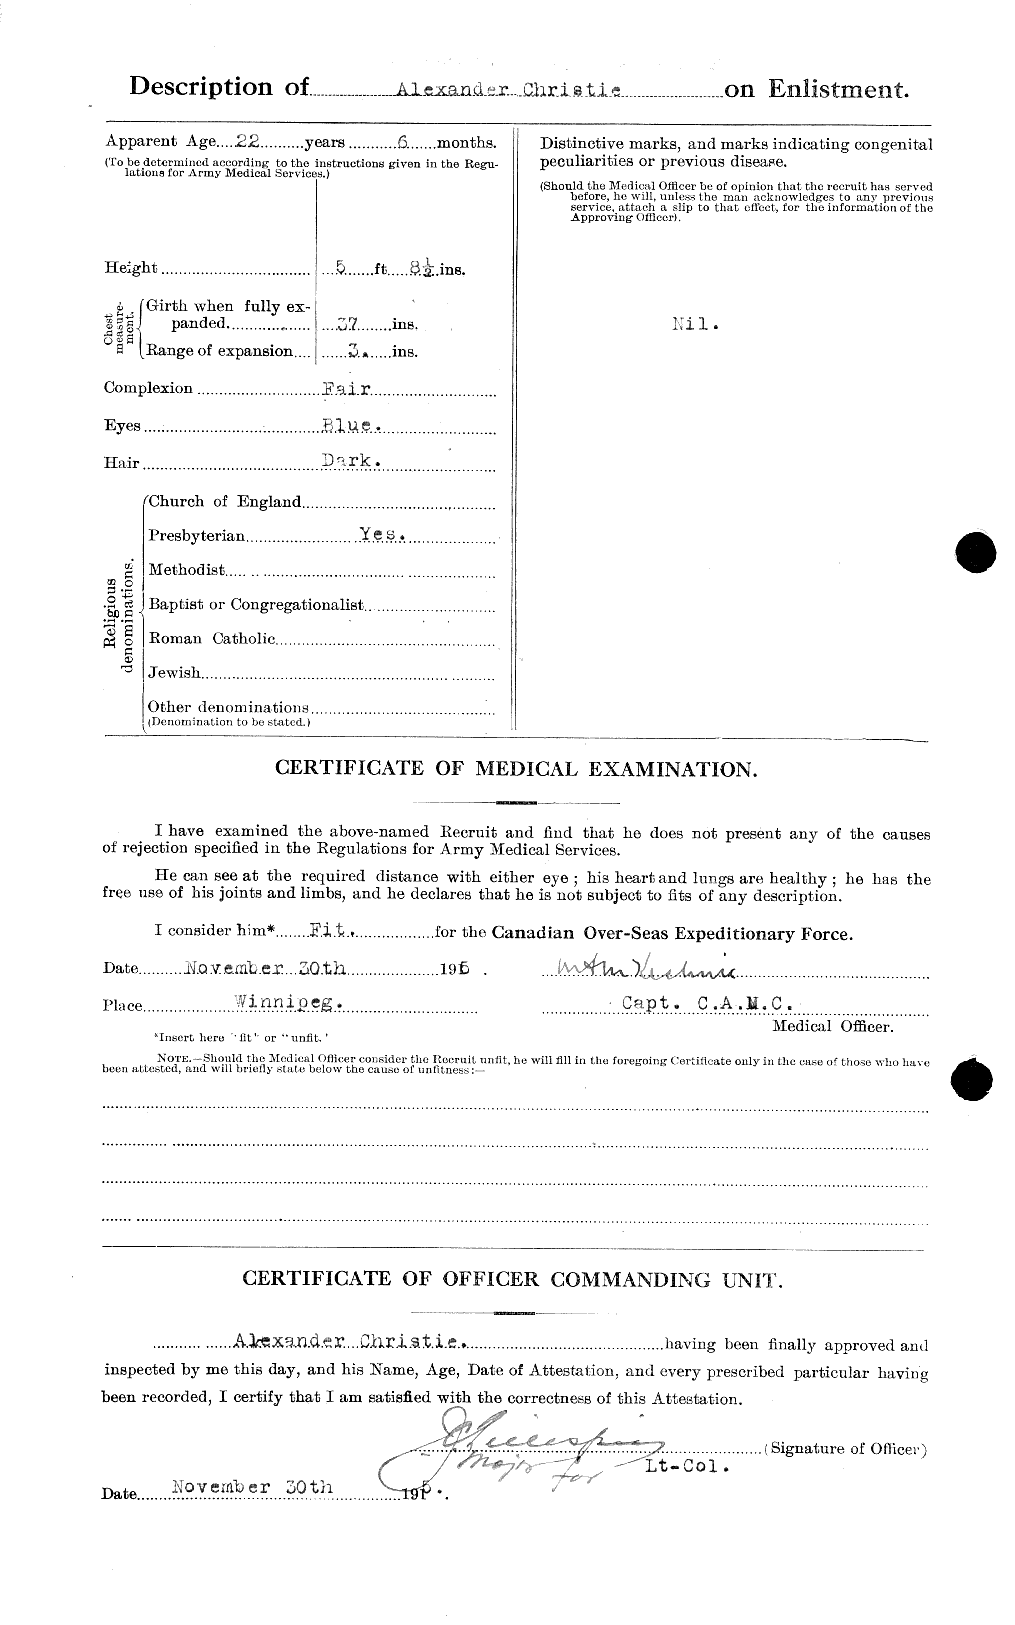 Personnel Records of the First World War - CEF 021860b